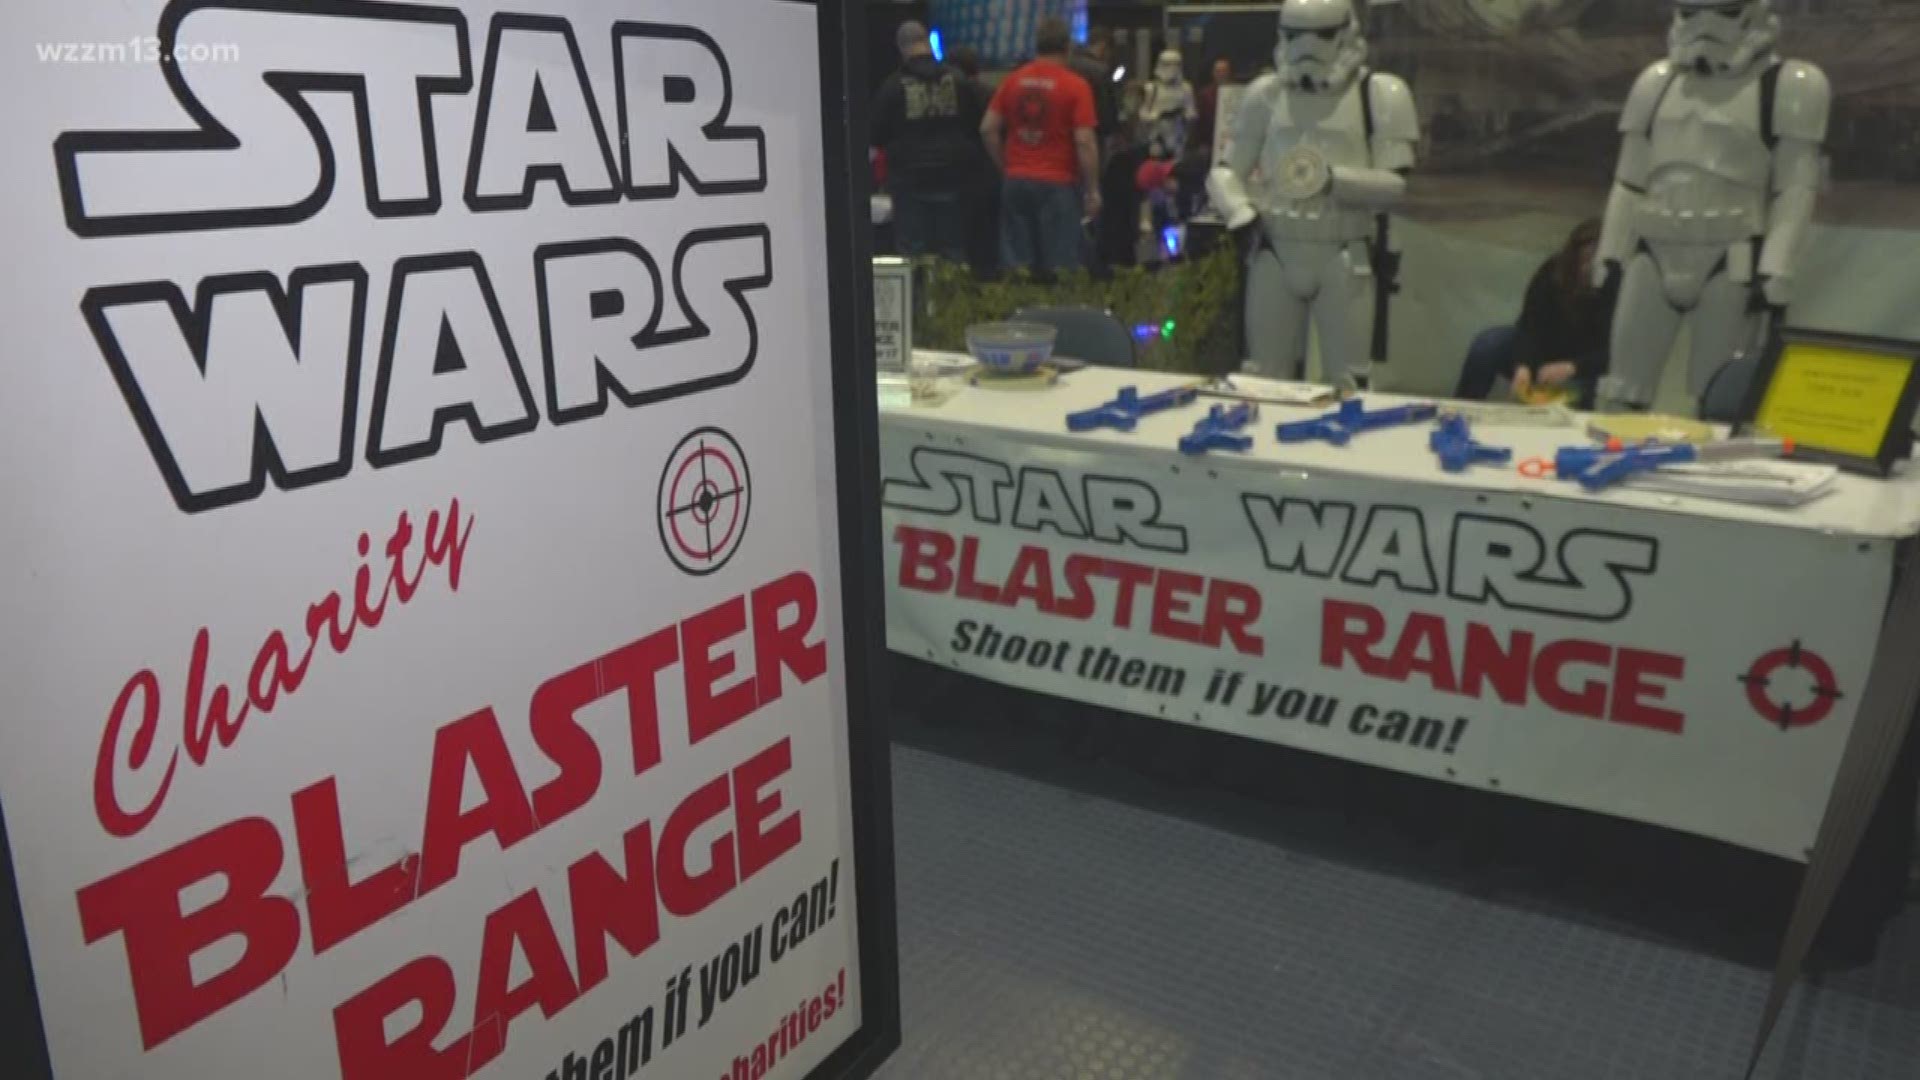 Star Wars night held at Grand Rapids Griffins game